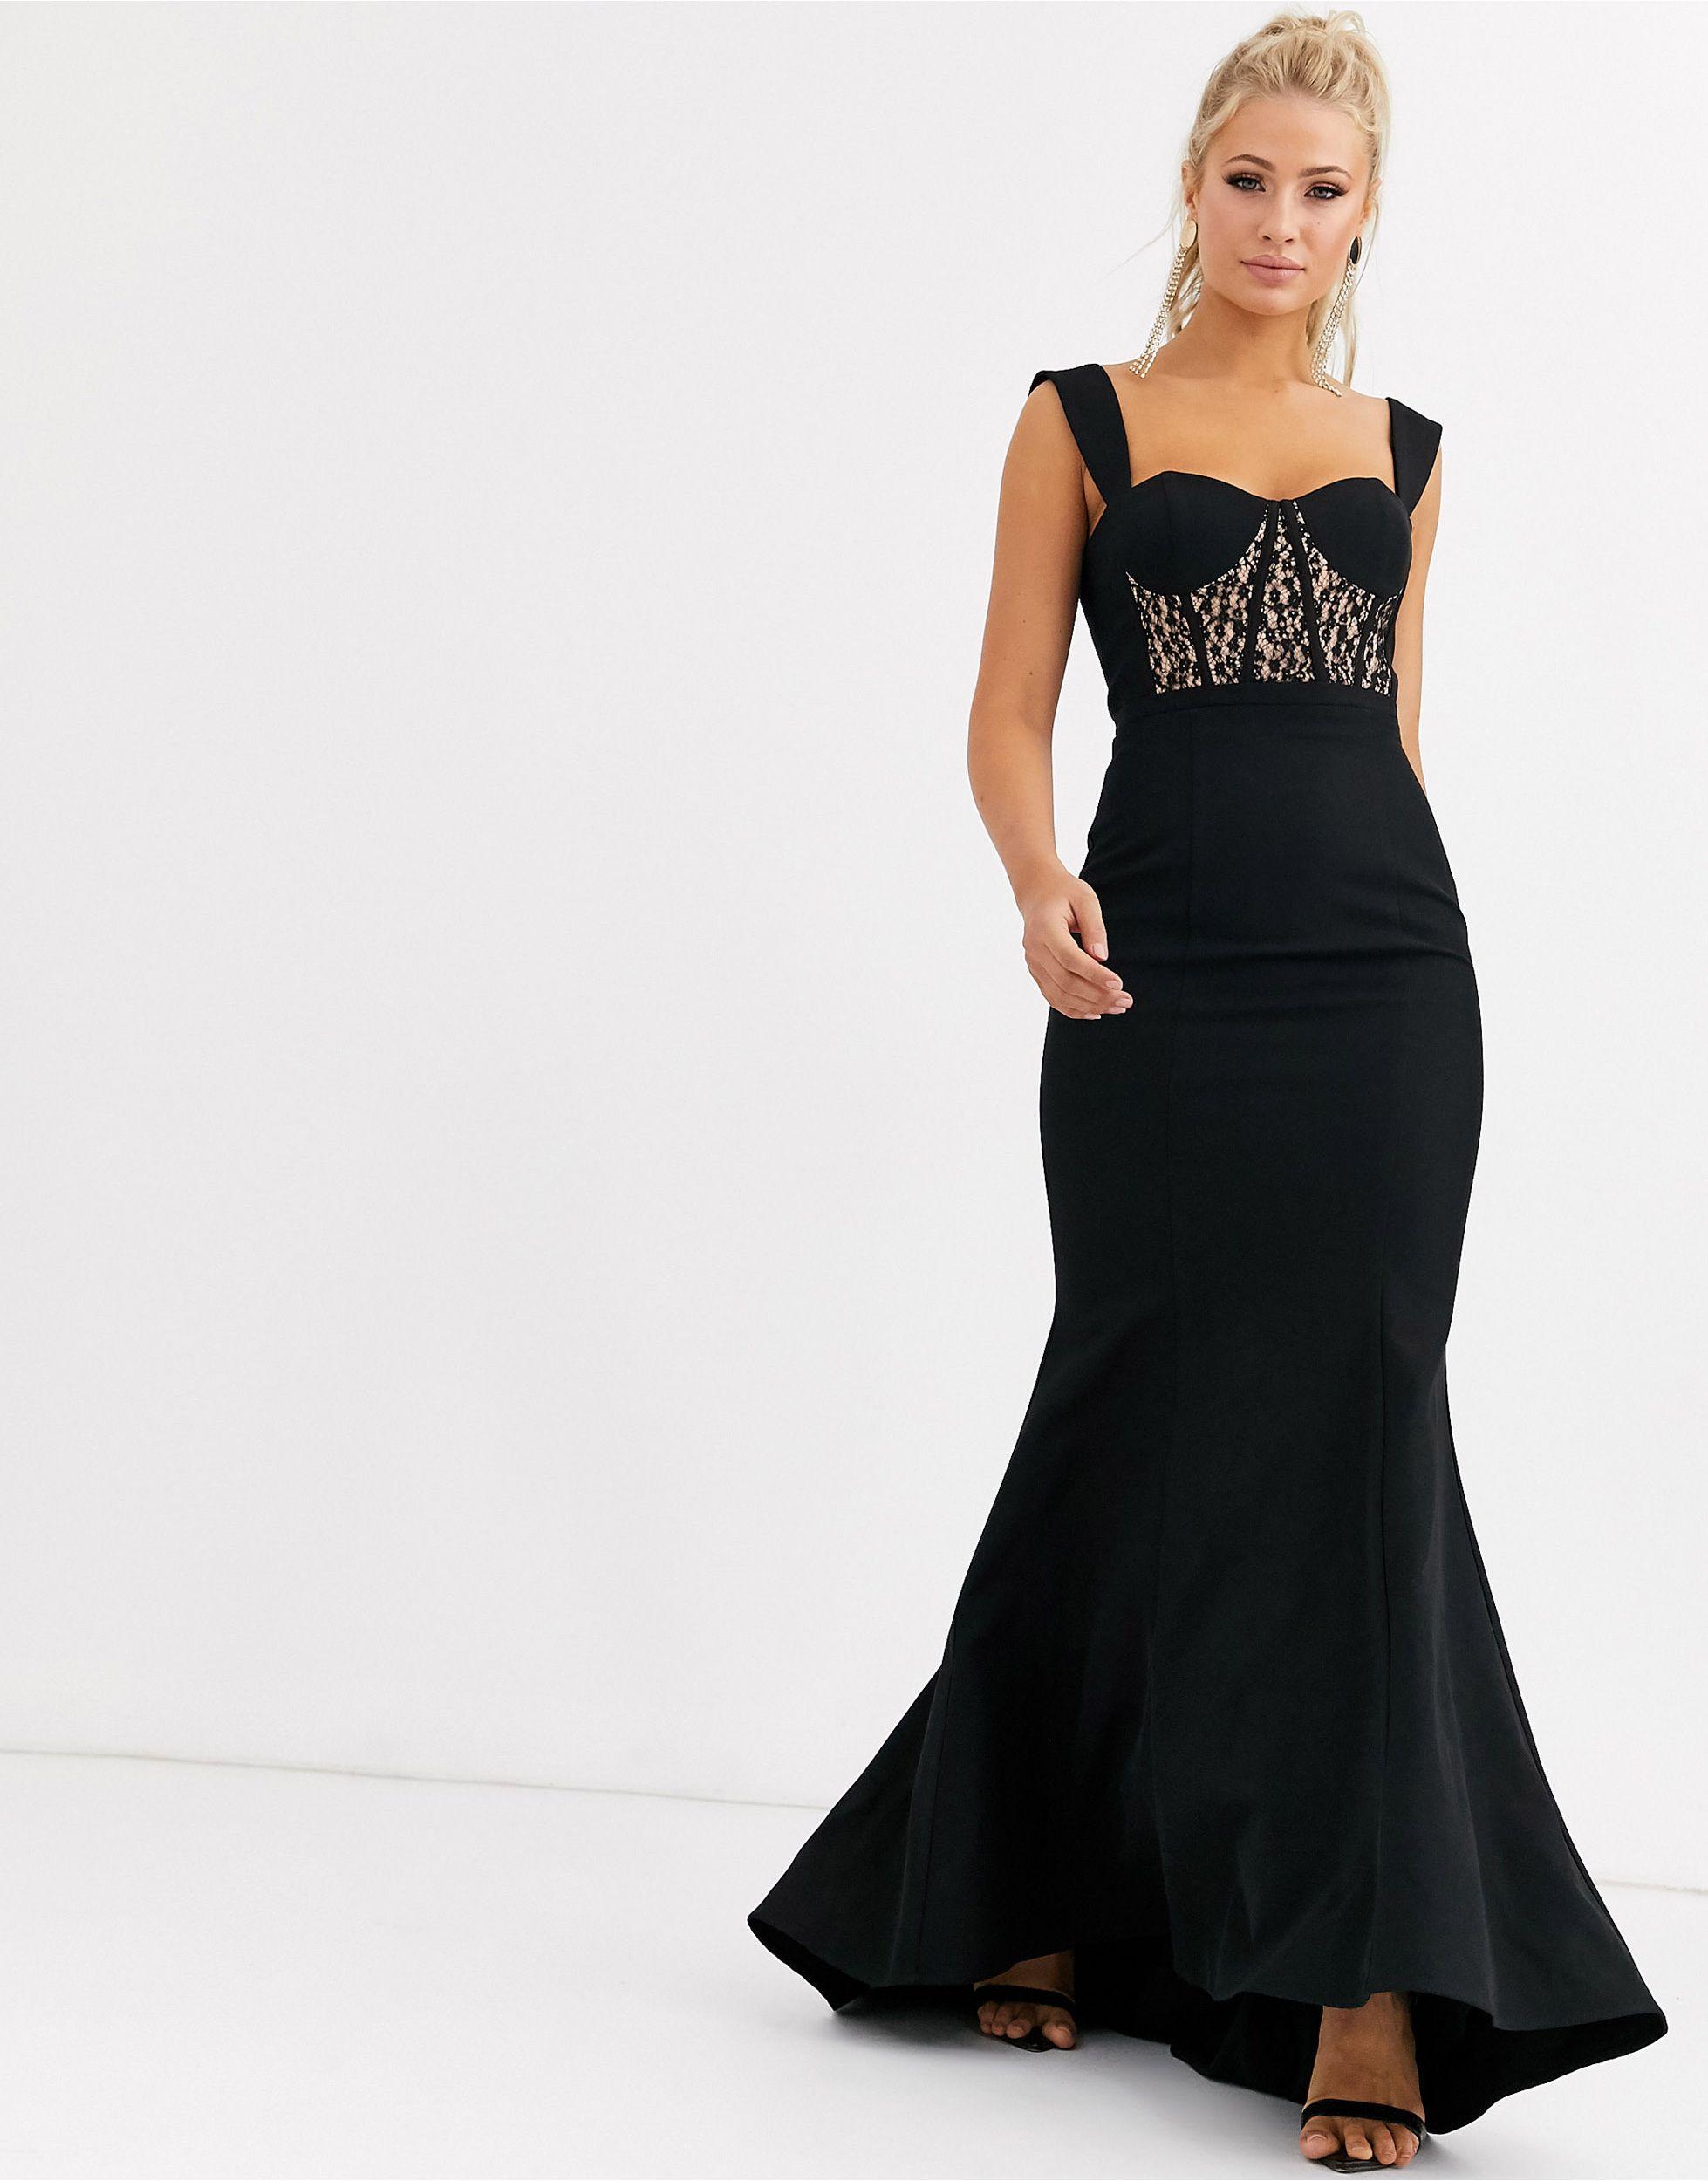 Jarlo Bustier Maxi Dress With Lace Insert in Black | Lyst